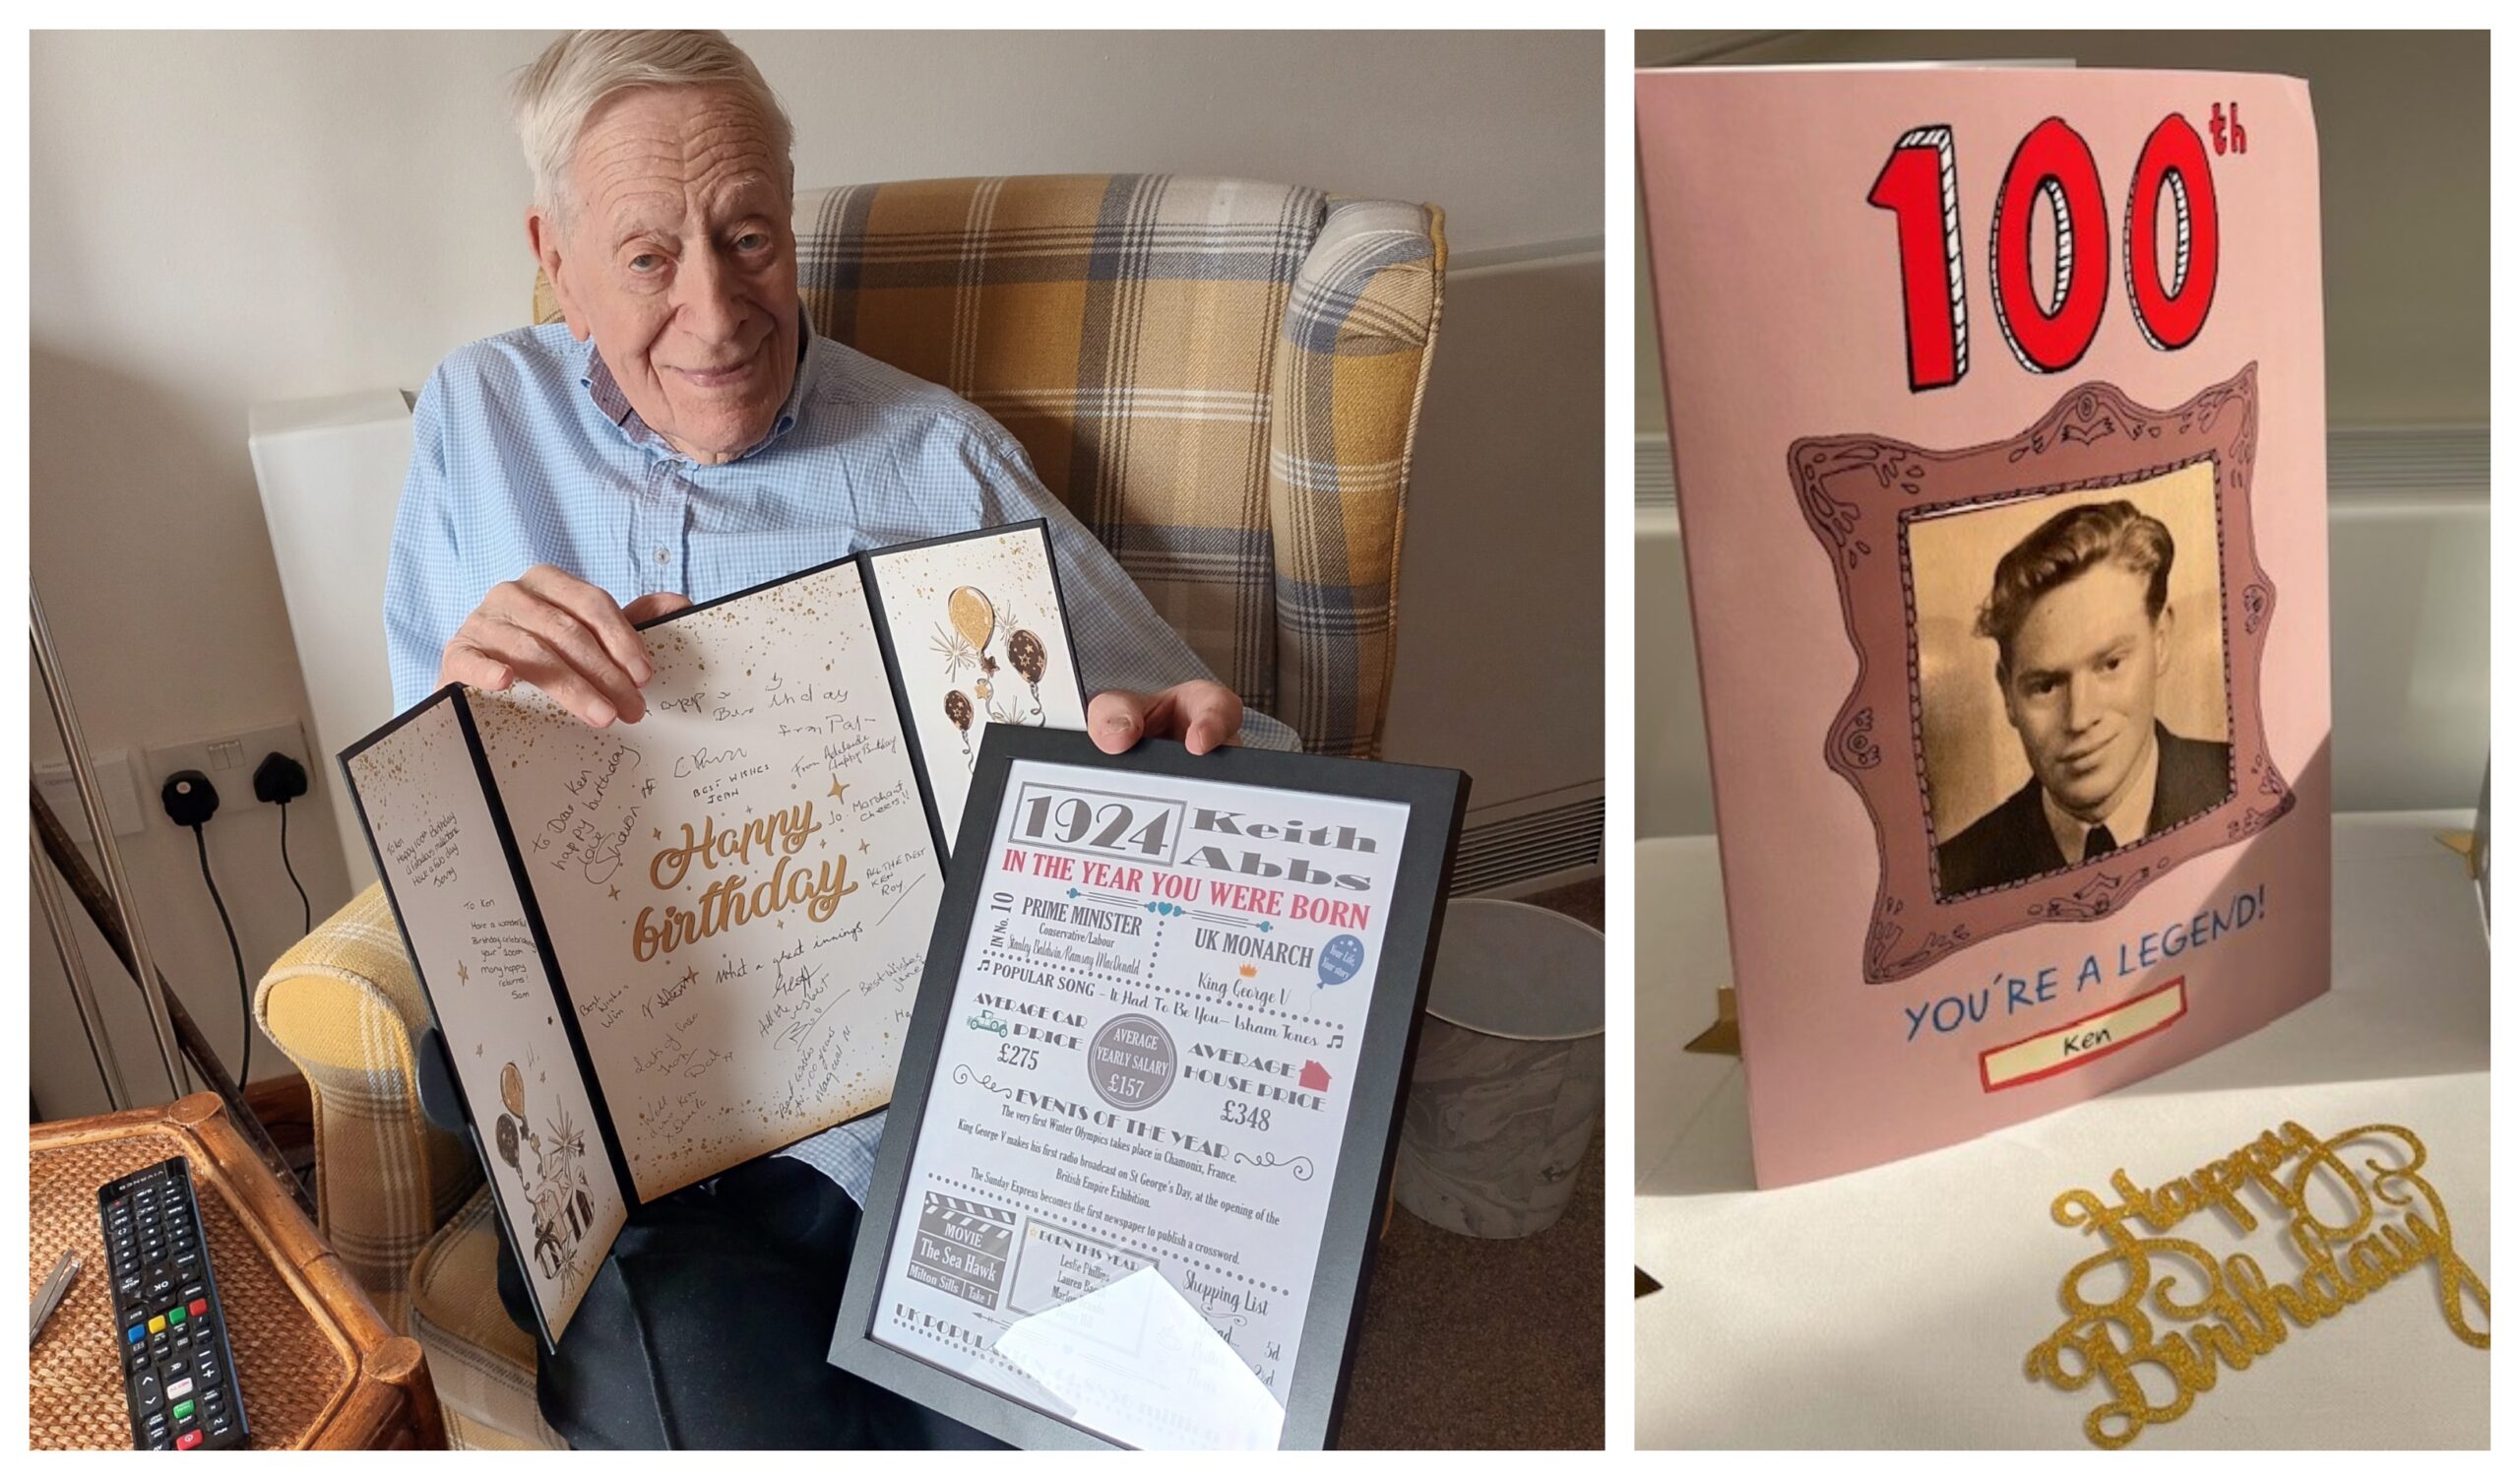 Ken Abbs celebrated his 100th birthday at Ness Court, Burwell, a retirement community run by Sanctuary Supported Living